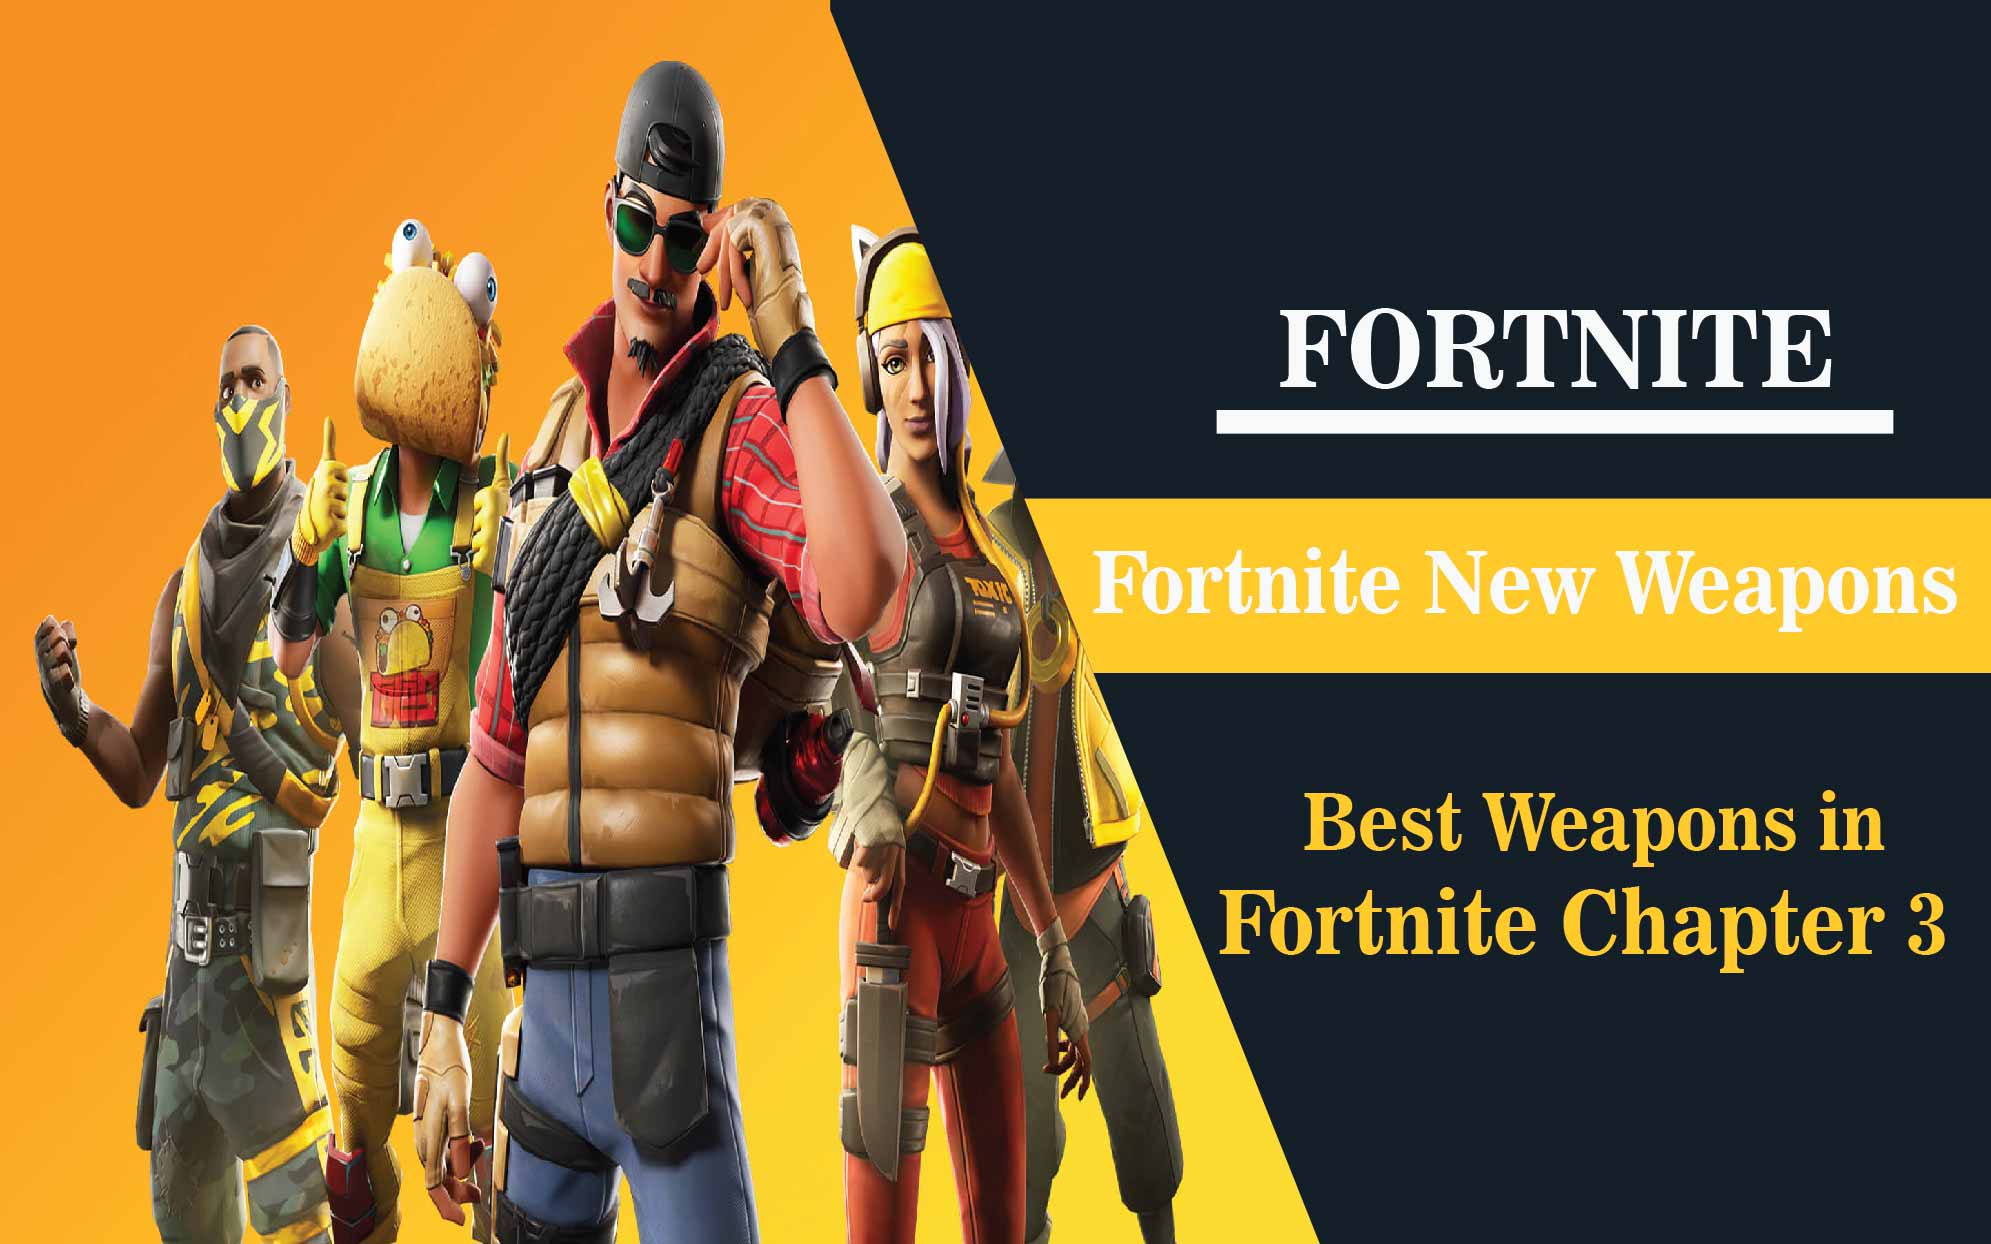 Fortnite New Weapons